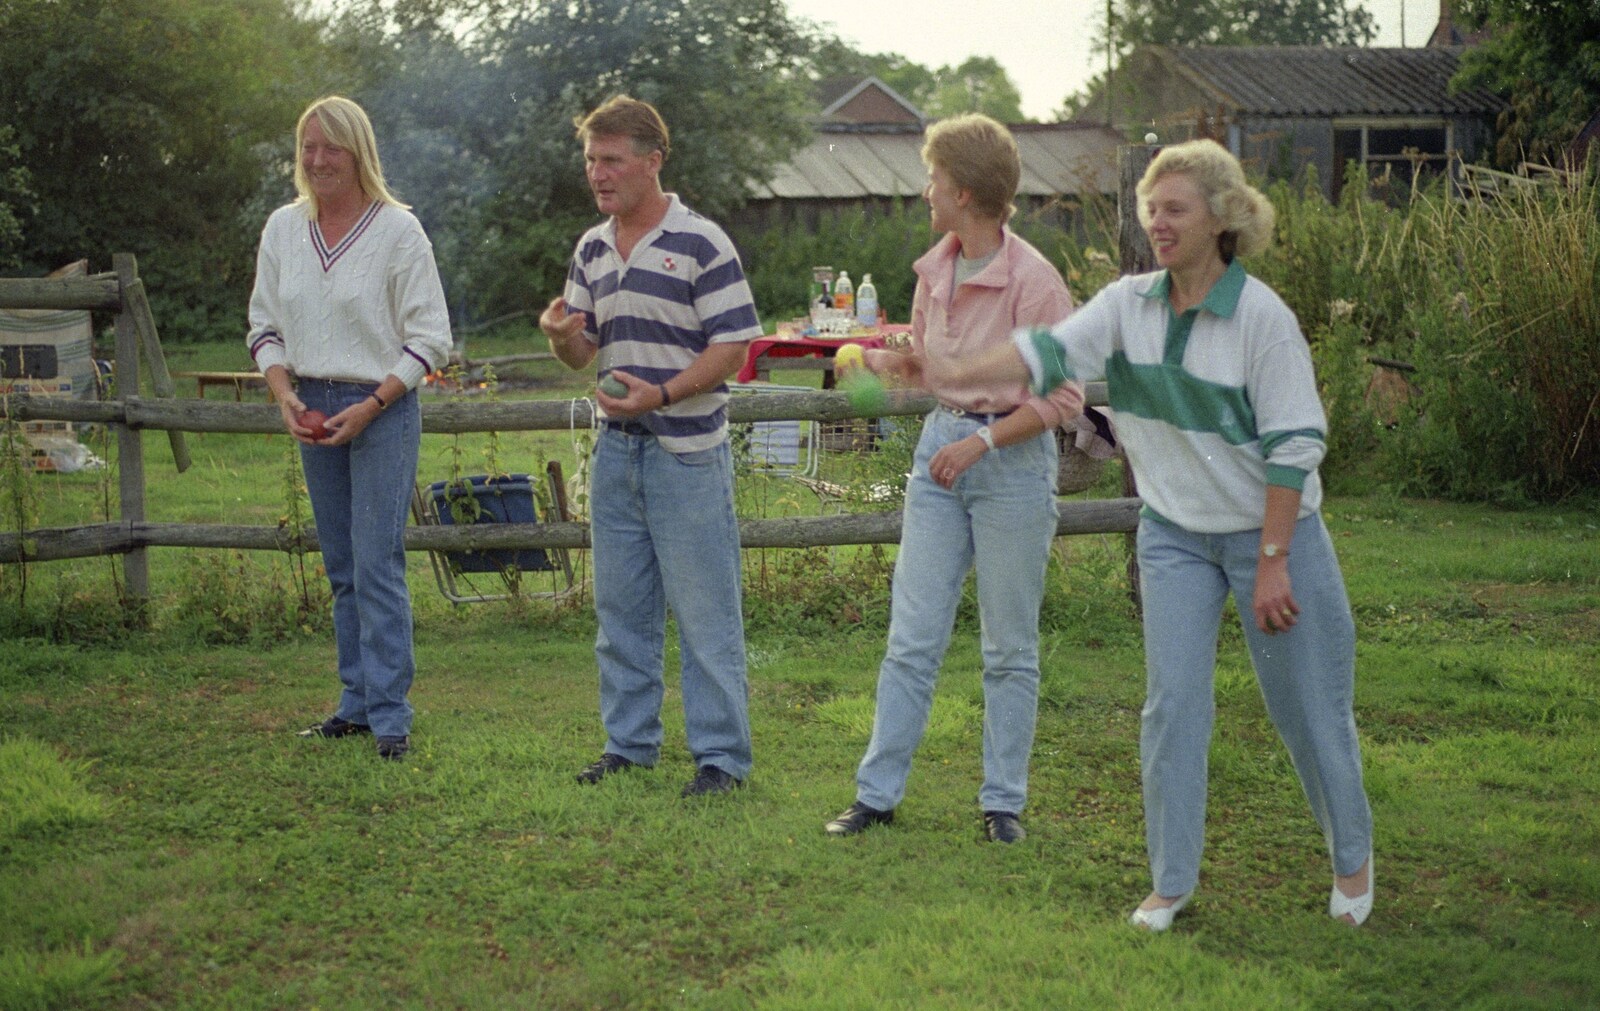 A game of boules breaks out from Sue's Fire Dance, Stuston, Suffolk - 21st July 1990